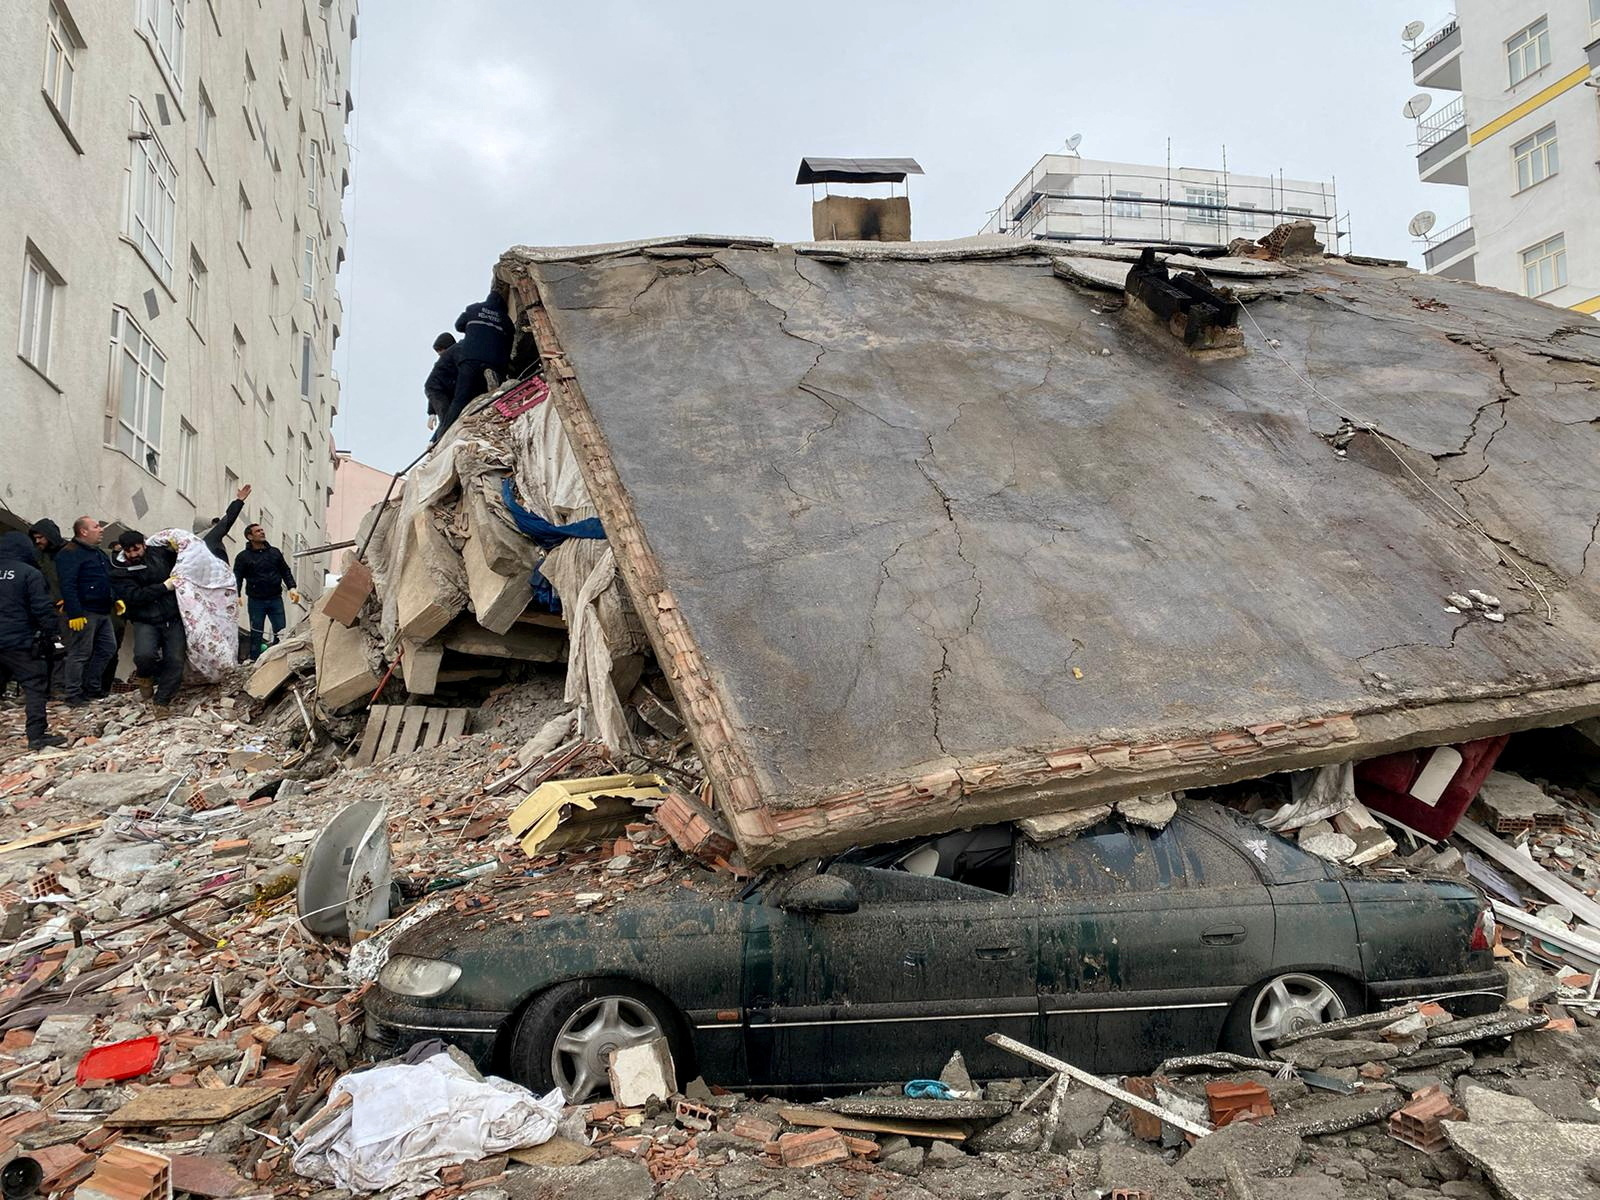 An apartment block was reduced to rubble in the city of Diyabakir, where rescuers are desperately searching for survivors./Sertac Kayar/Reuters.